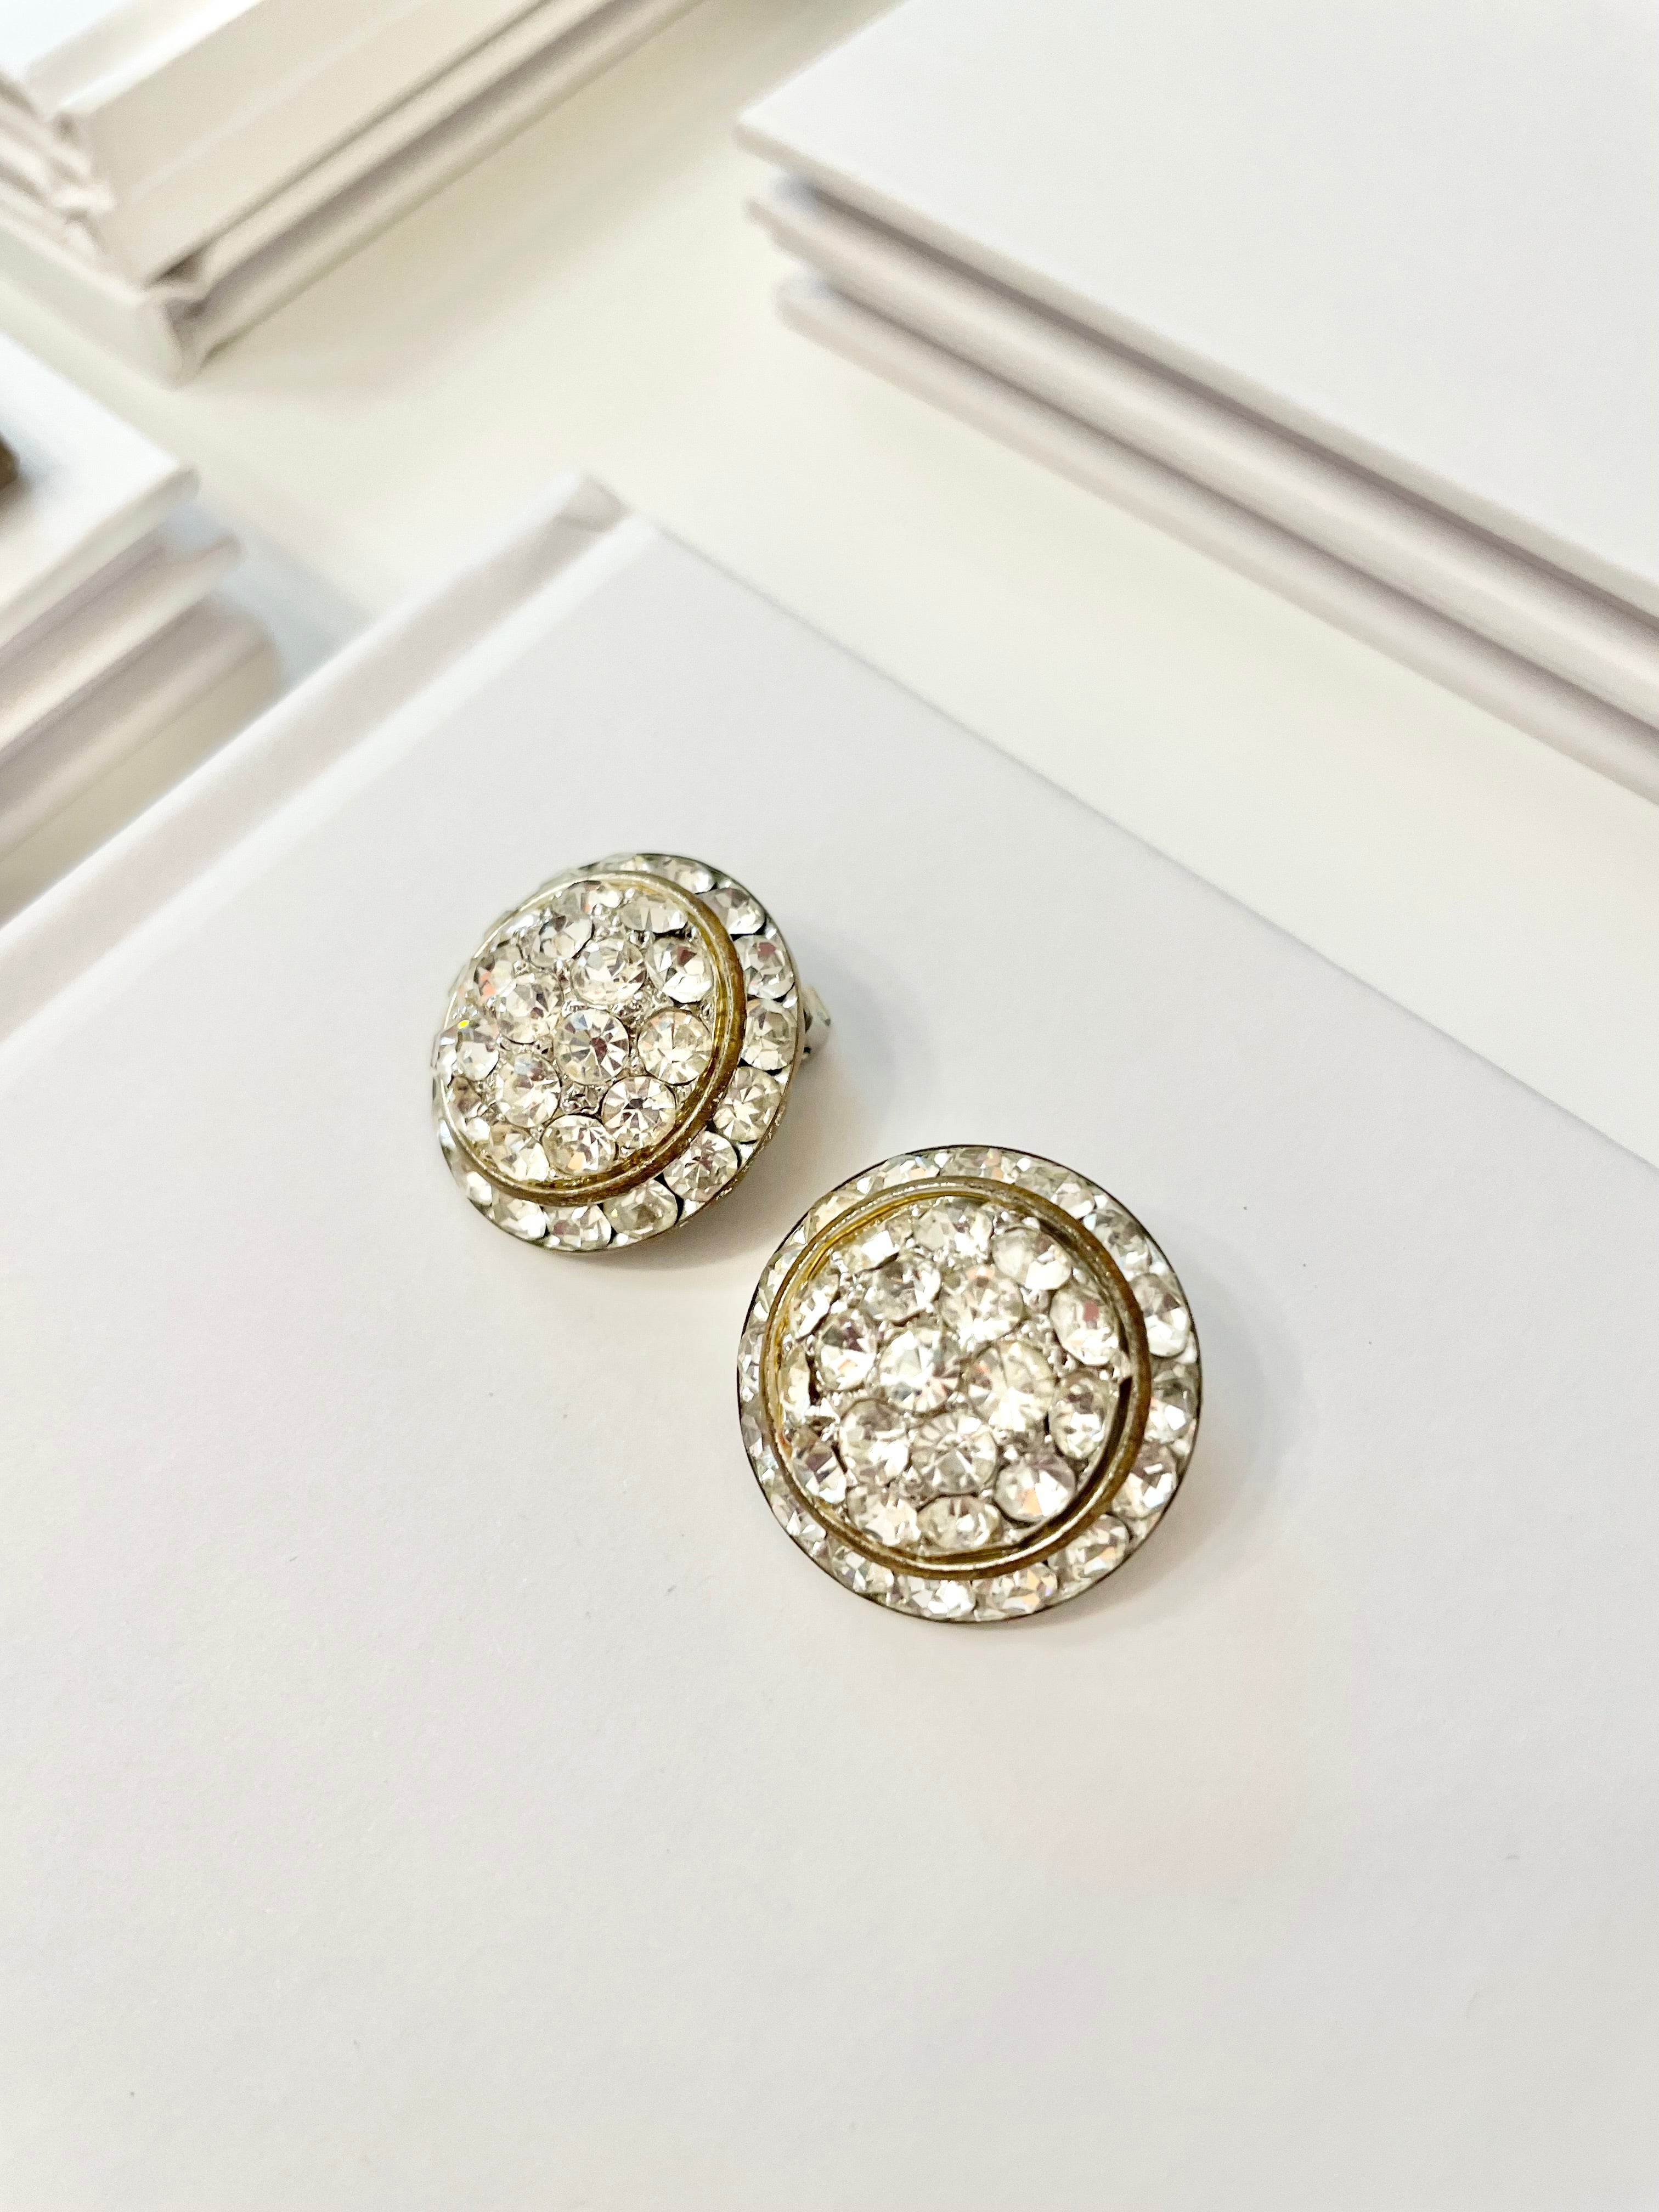 These splendid sparkly 1960's button earrings are truly divine! So perfect..